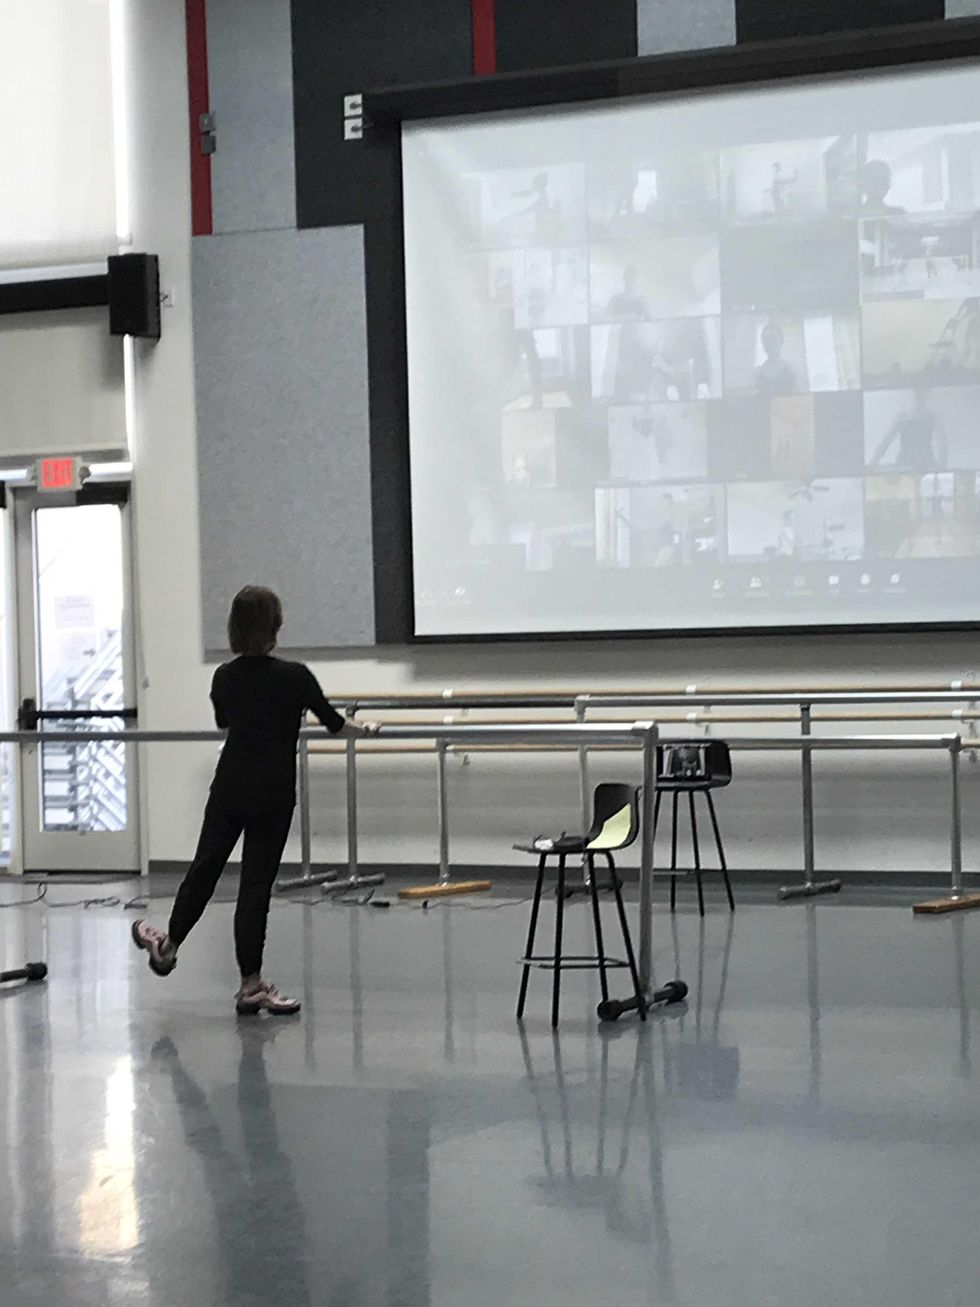 A woman alone in a studio at barre demonstrates a tendu flex looking up at a projection of students on Zoom.